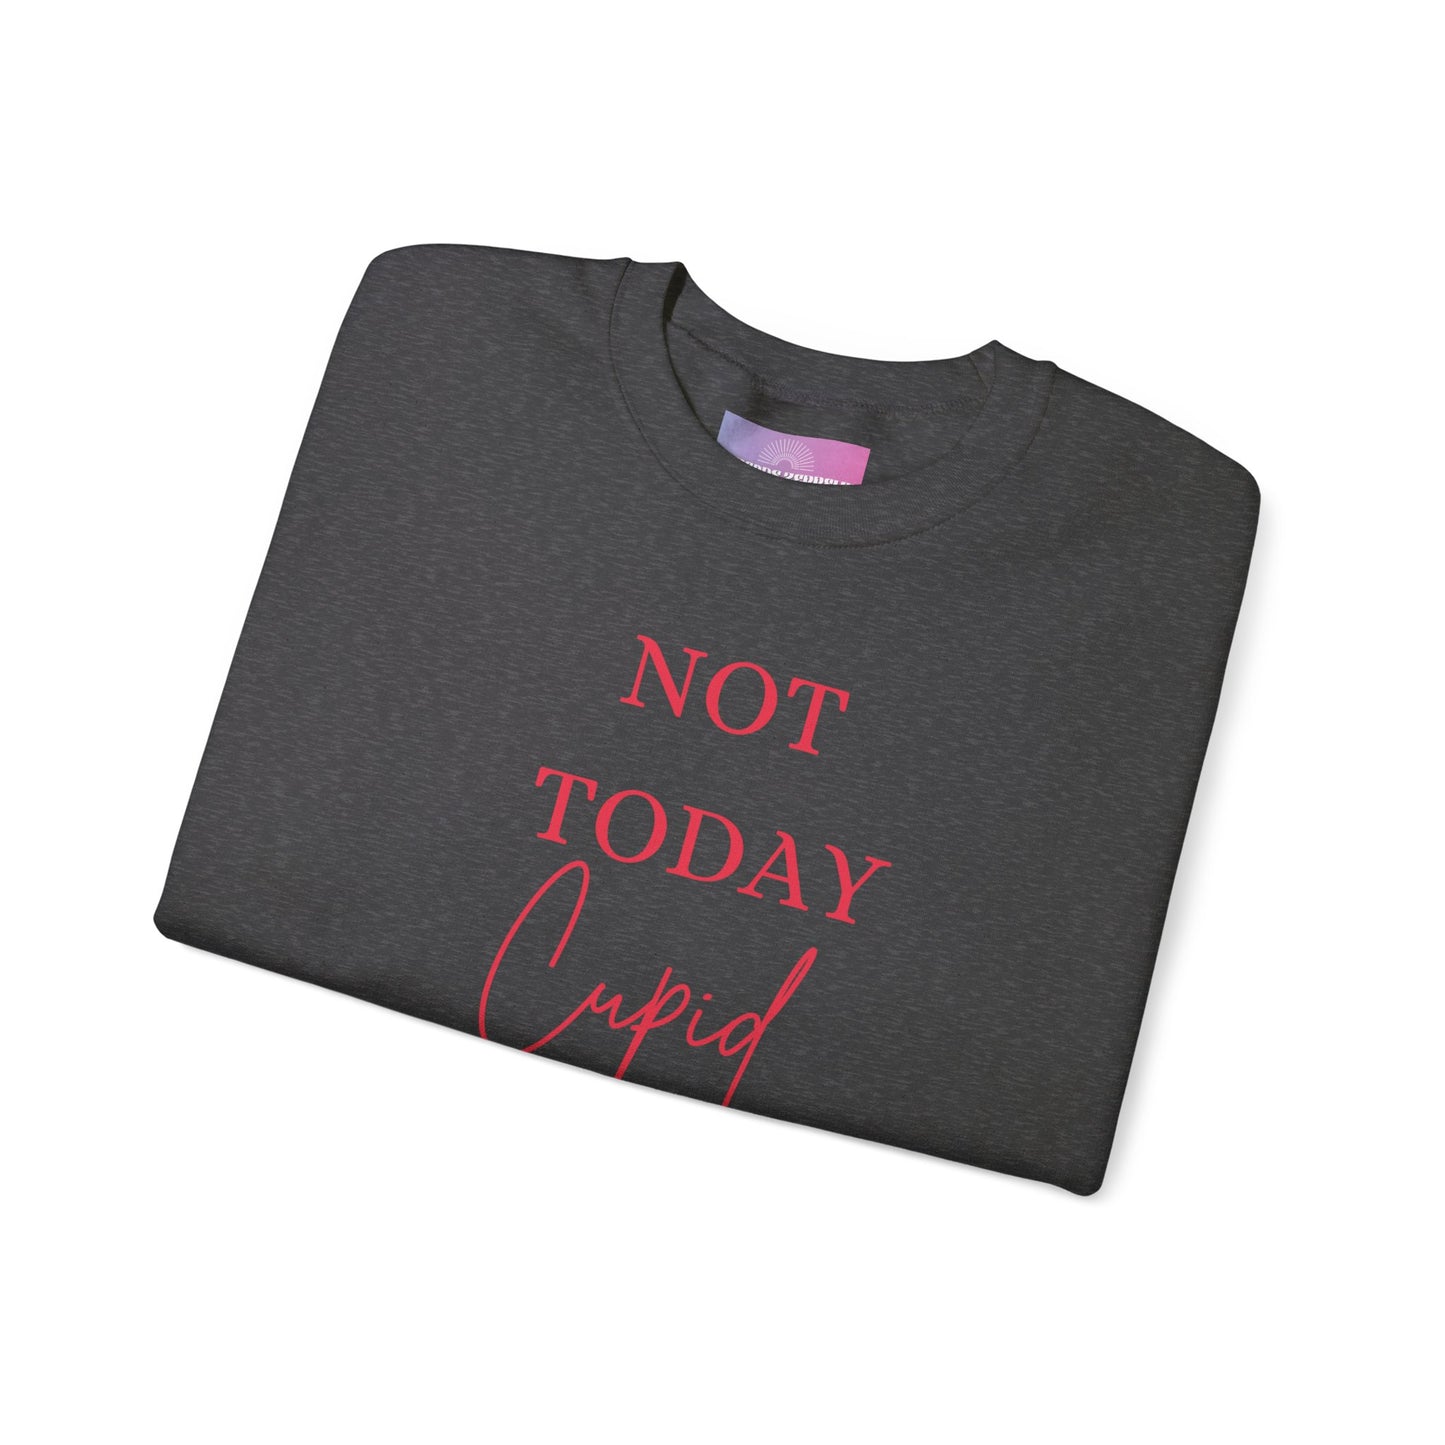 Not Today Cupid Sweatshirt, Funny Valentines Day Crewneck Sweater, Gift for bestie, Anti Valentines Day, Cupids Arrow, Gift for her